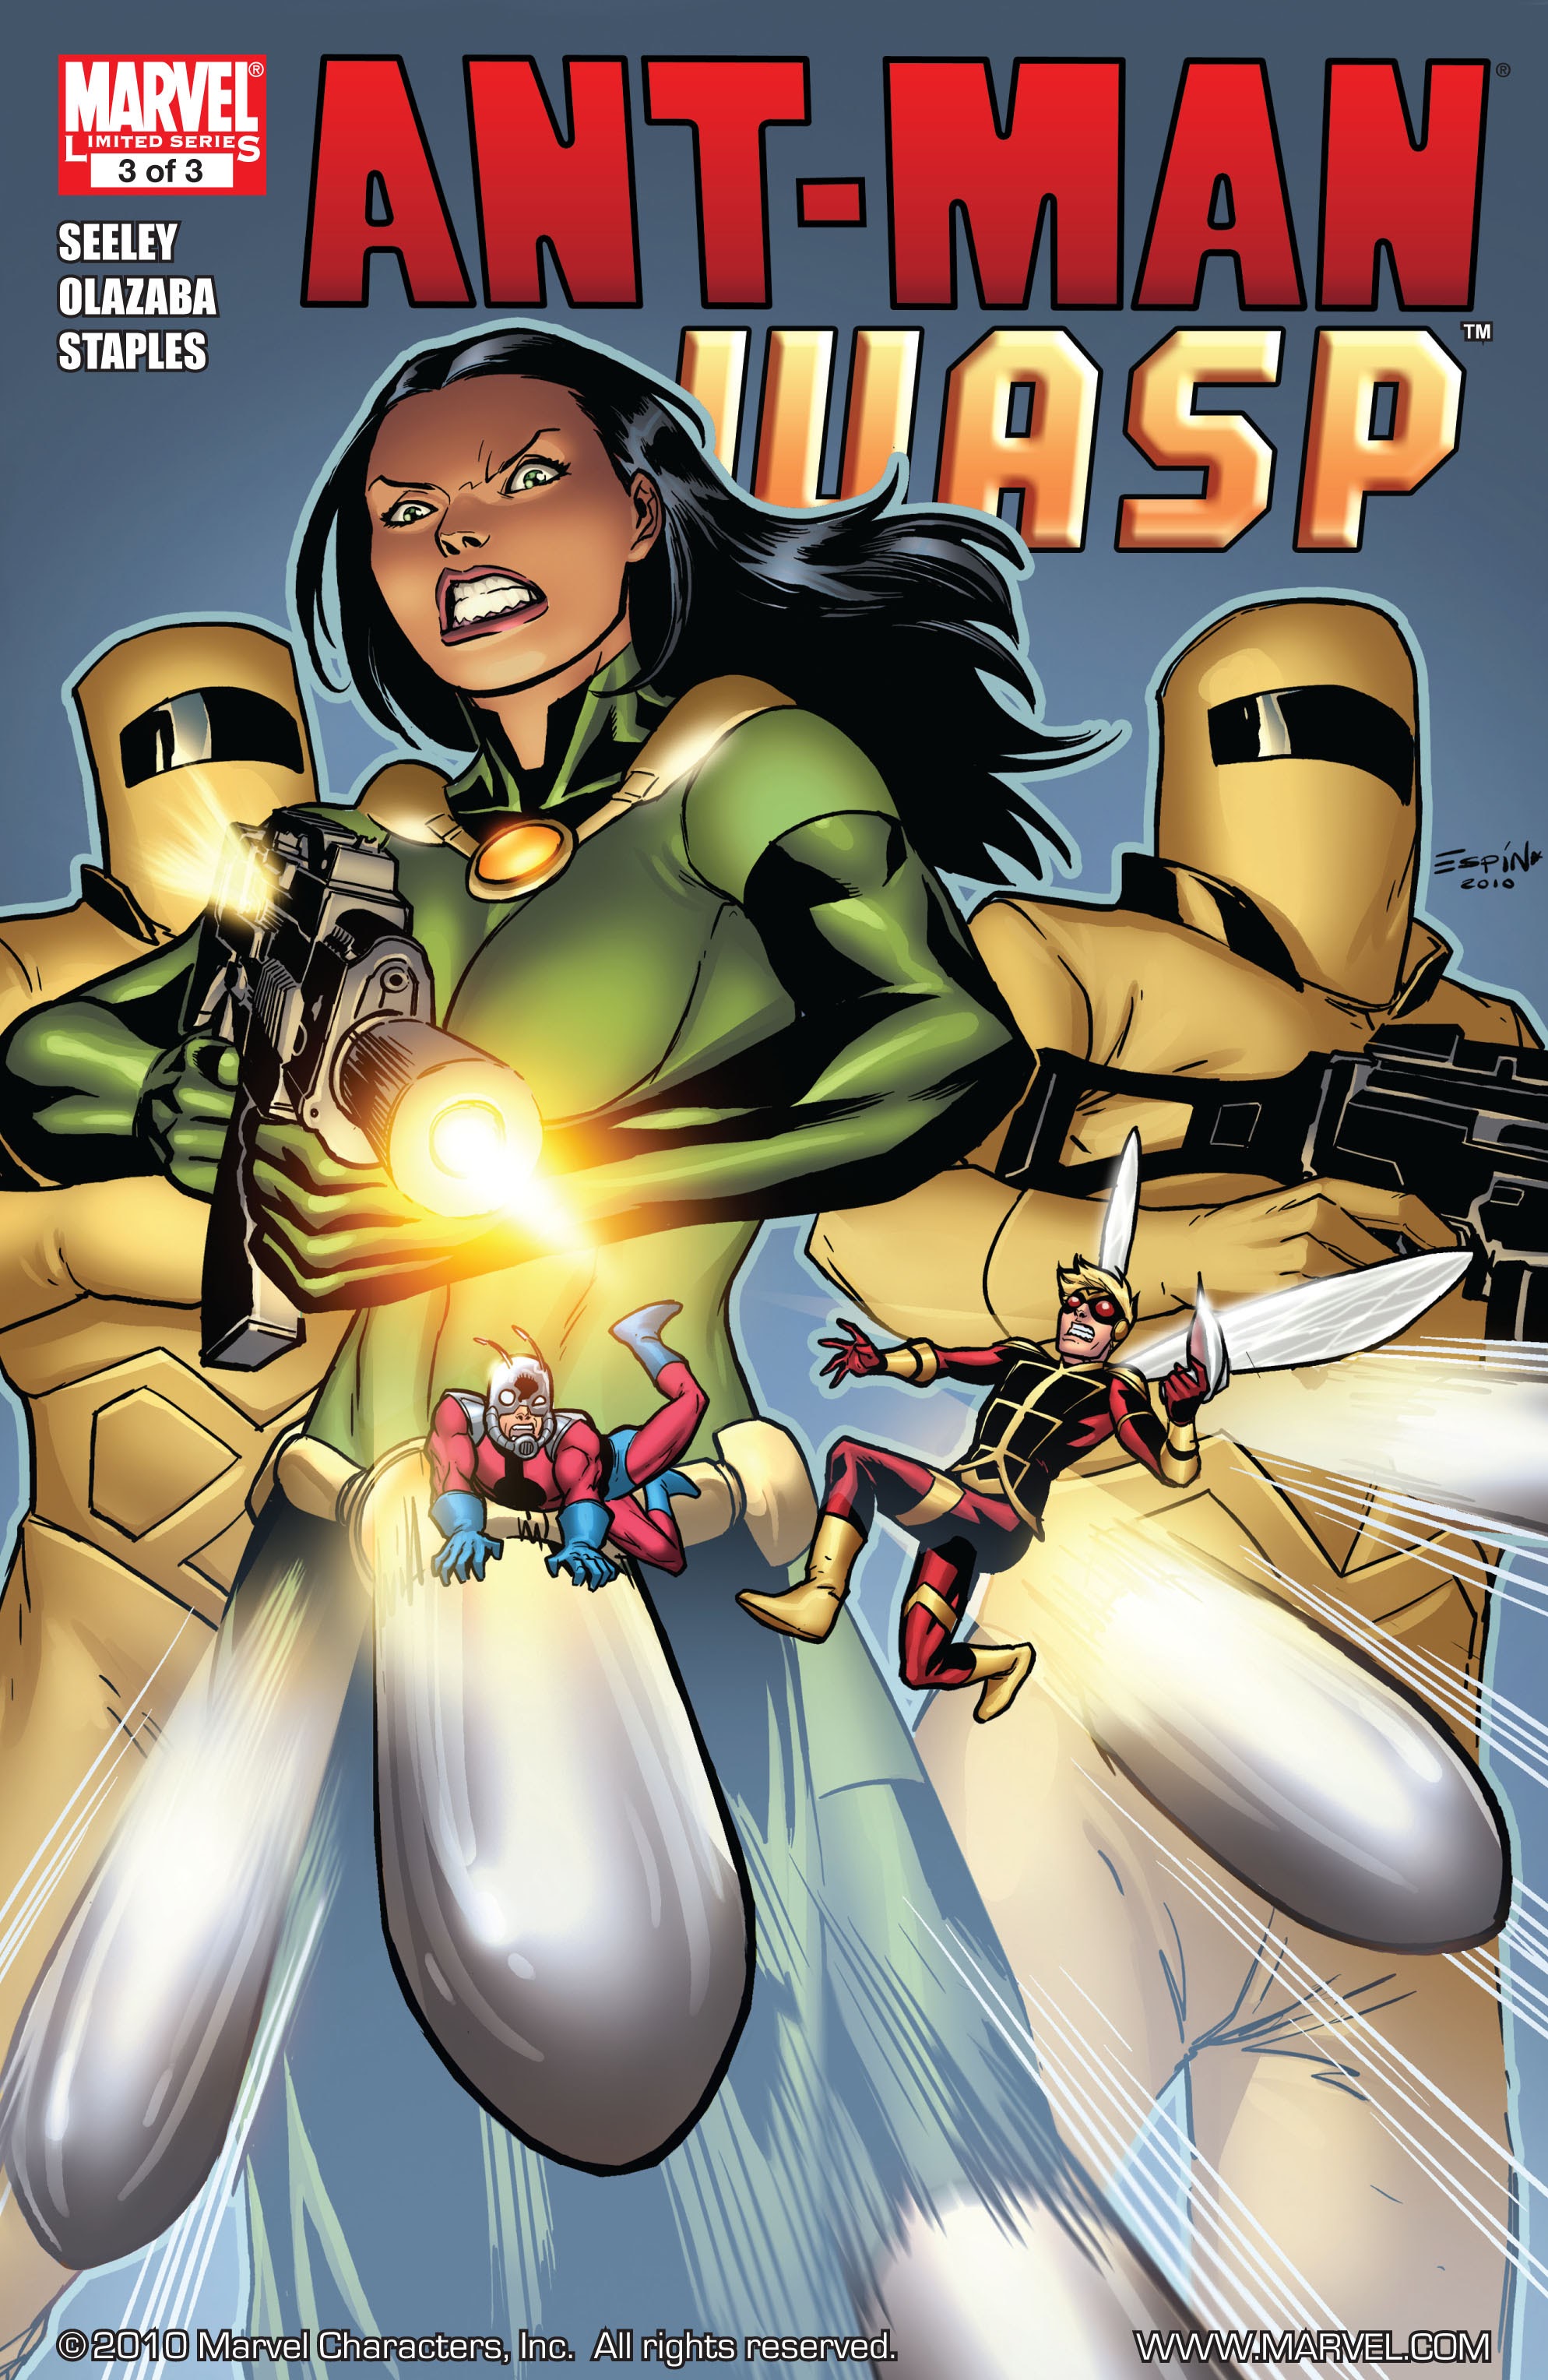 Ant Man Wasp Issue 3 | Read Ant Man Wasp Issue 3 comic online in high  quality. Read Full Comic online for free - Read comics online in high  quality .| READ COMIC ONLINE